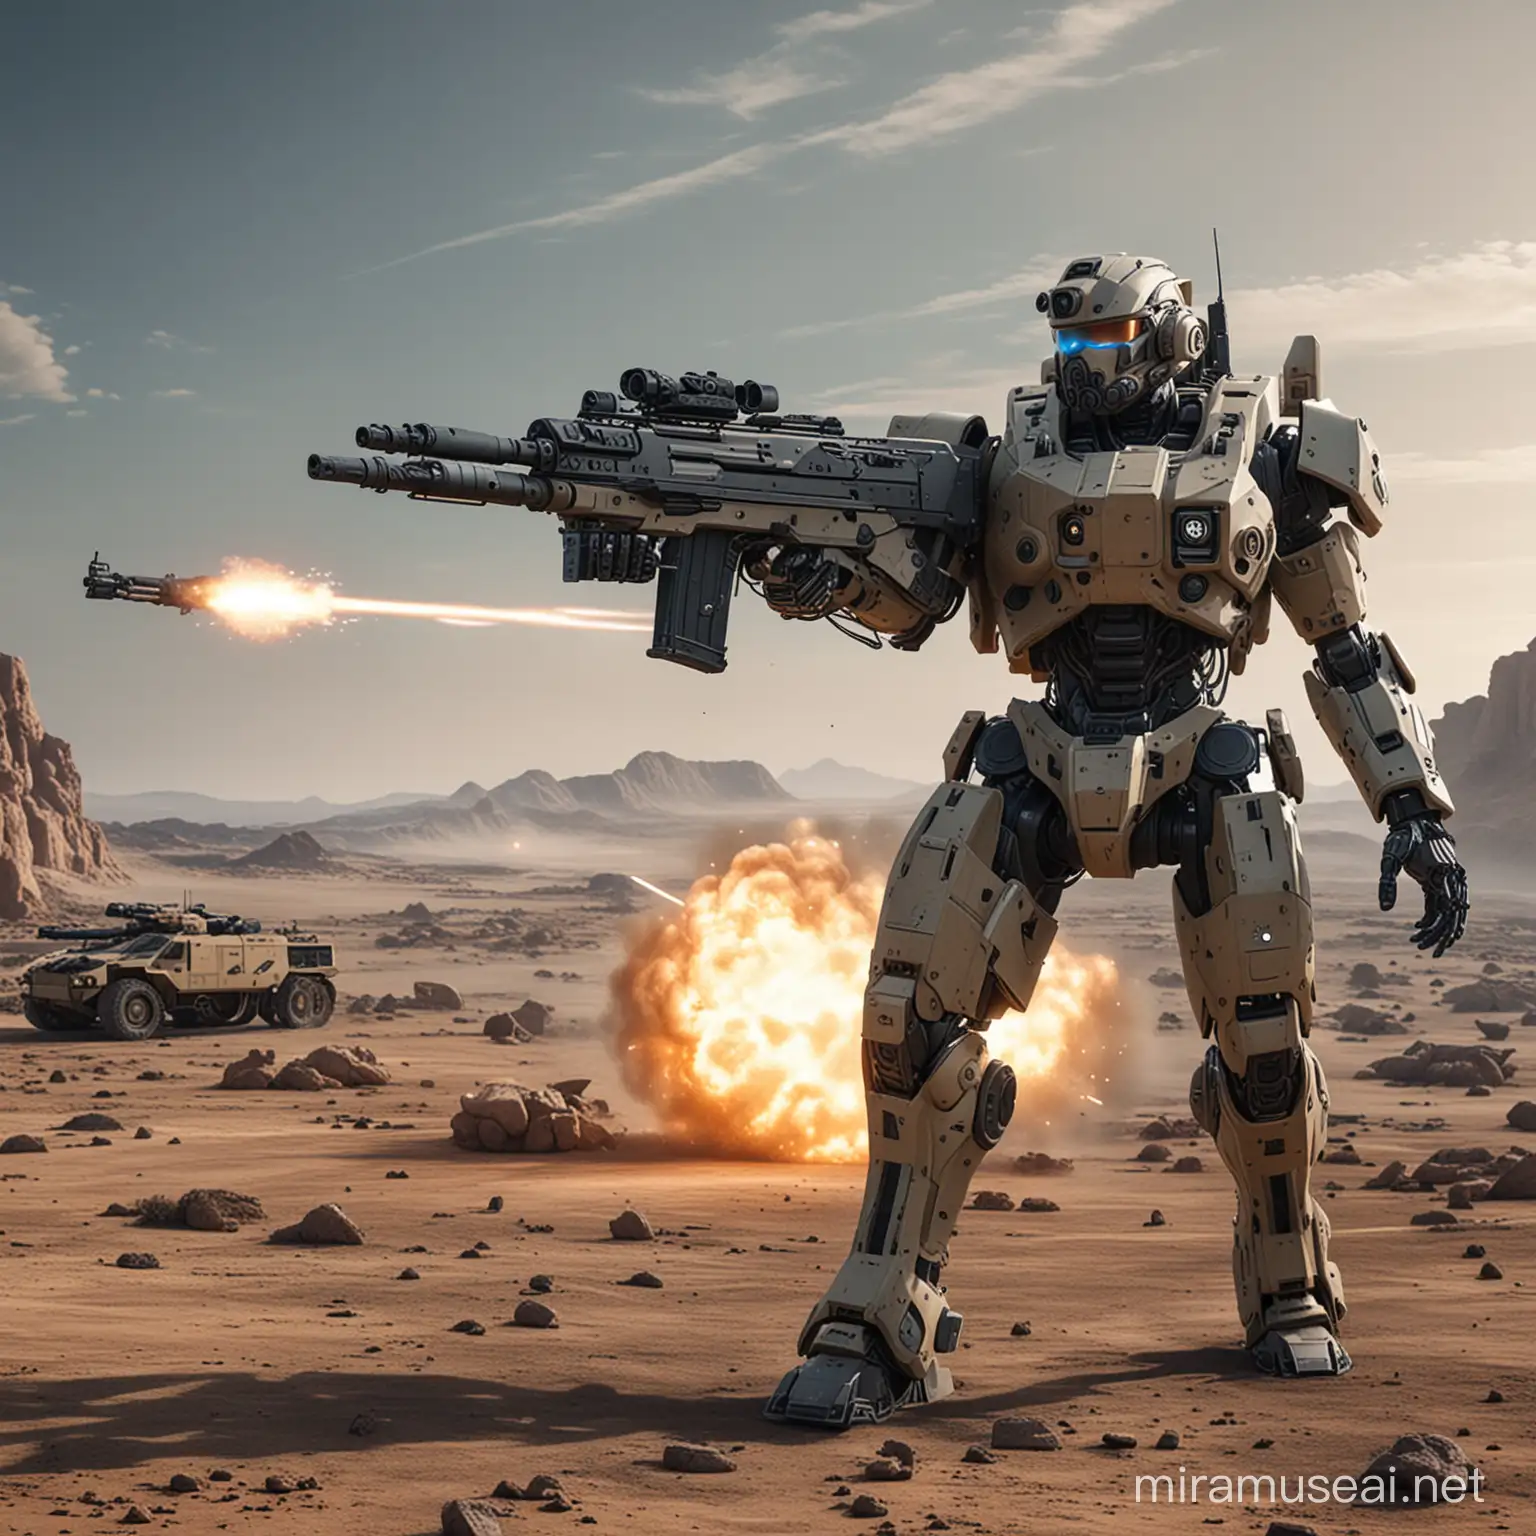 An AI-powered weapon system on a battleground aiming for the target to eliminate.  The image depicts a near future.